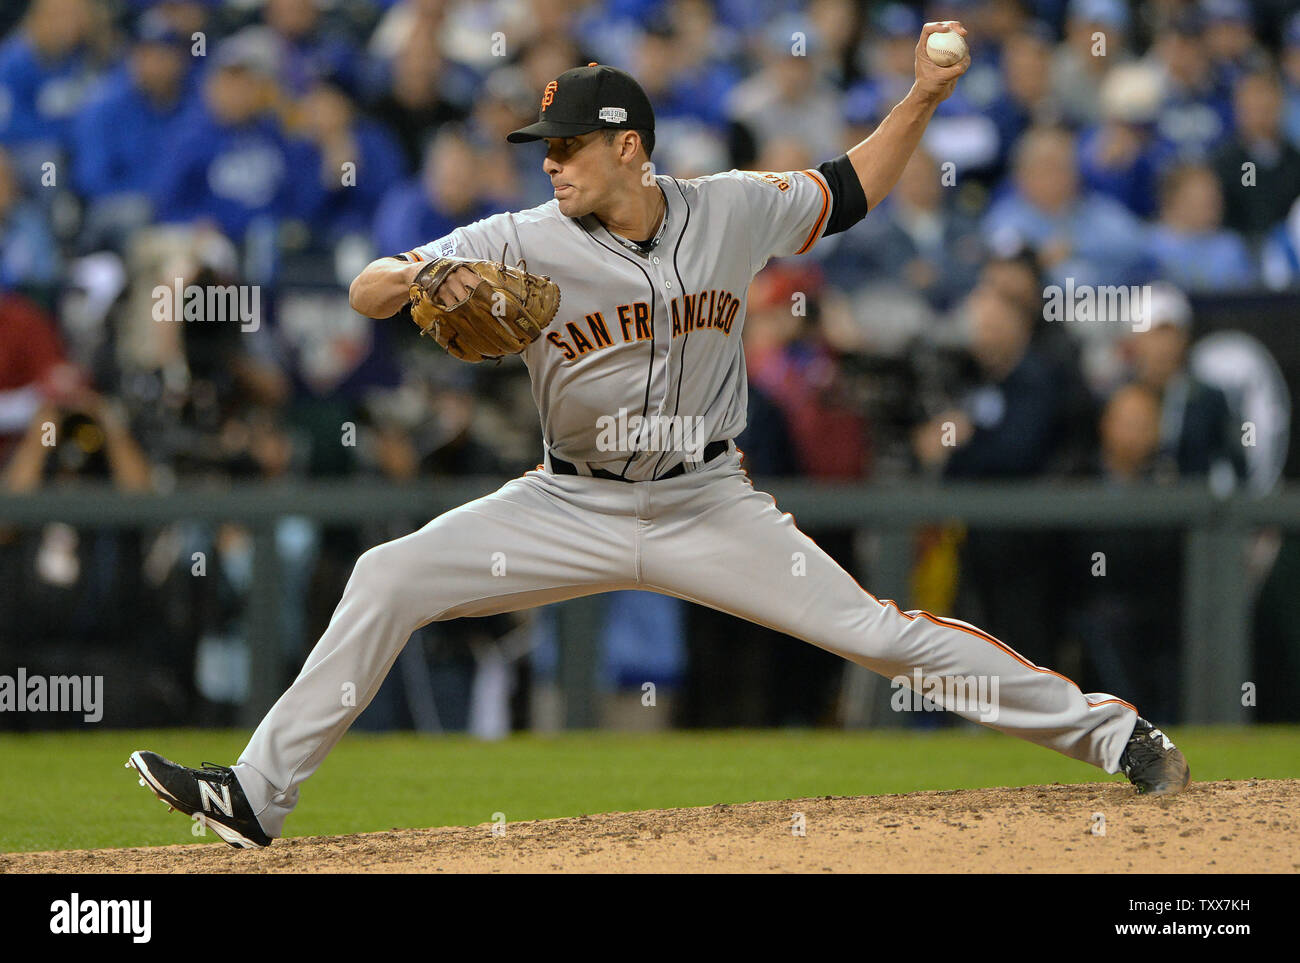 San Francisco Giants reliever Javier Lopez throws against the Kansas City Royals during the eighth inning of game 1 of the World Series at Kaufman Stadium in Kansas City, Missouri on October 21, 2014. UPI/Kevin Dietsch Stock Photo